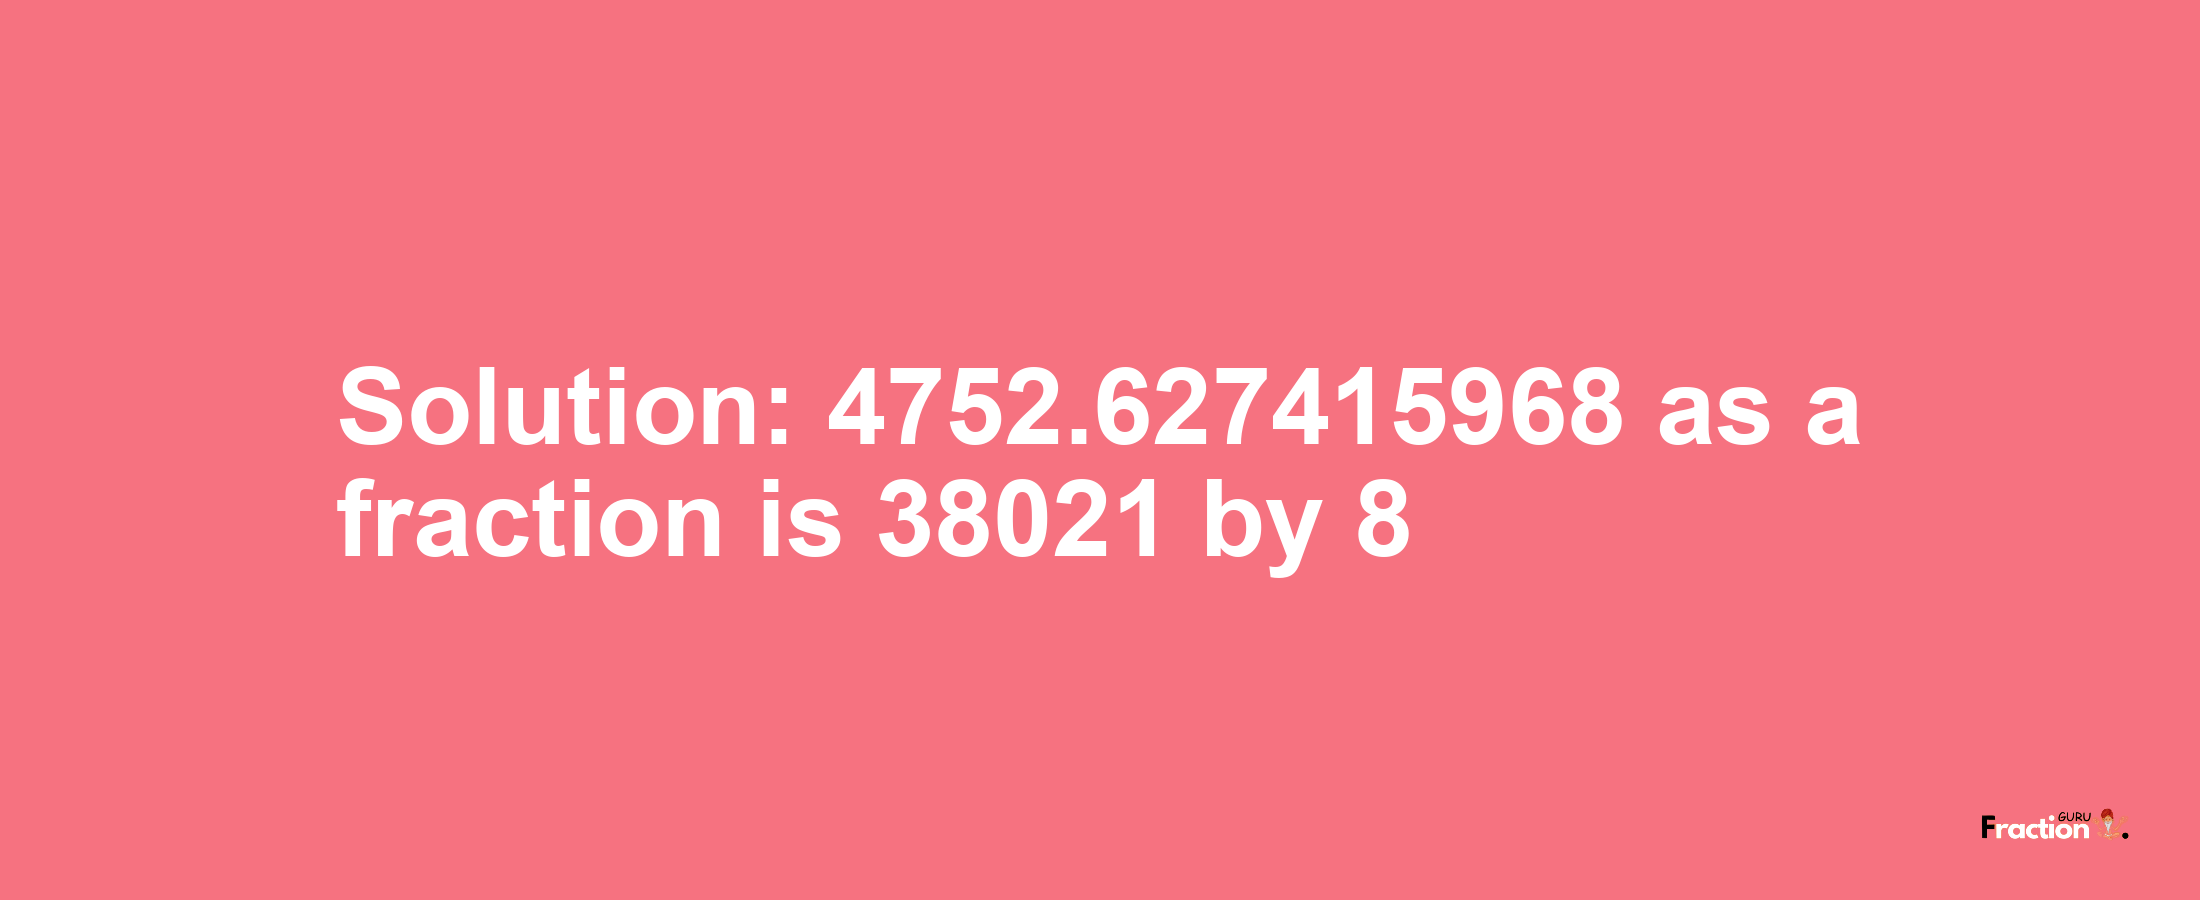 Solution:4752.627415968 as a fraction is 38021/8